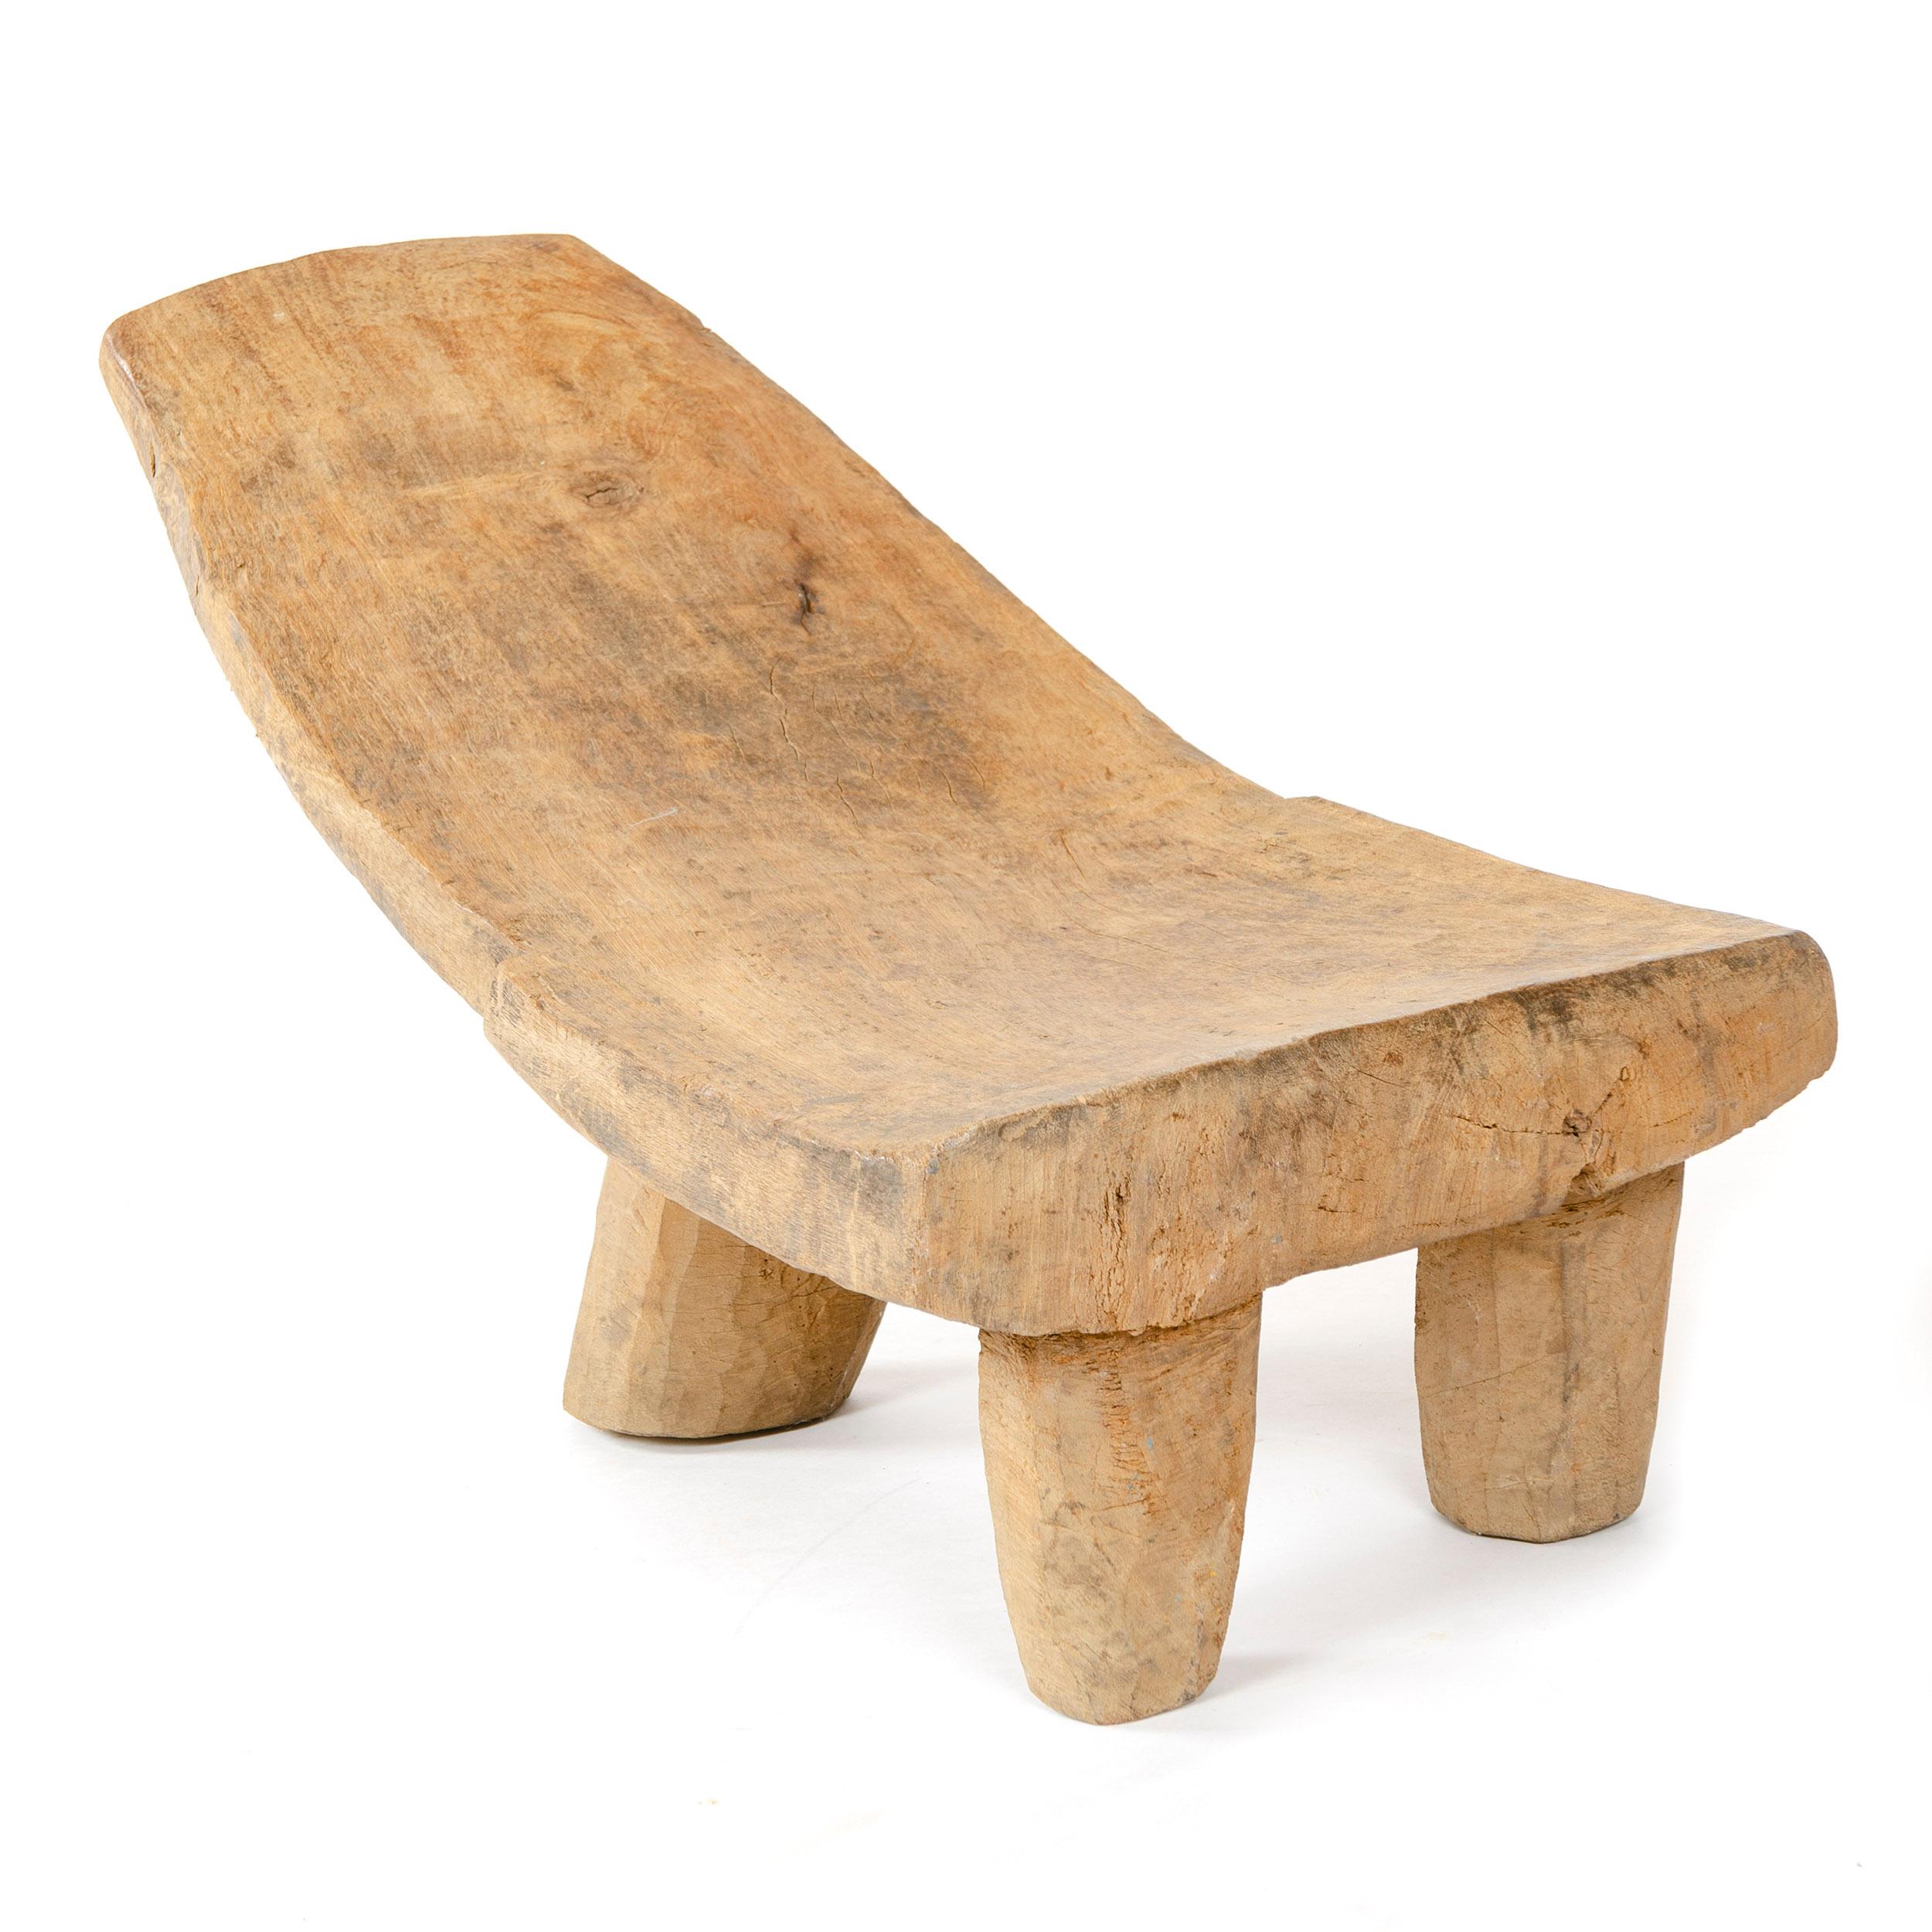 A low slung African stargazer chair carved from one piece of wood, having three (3) legs.